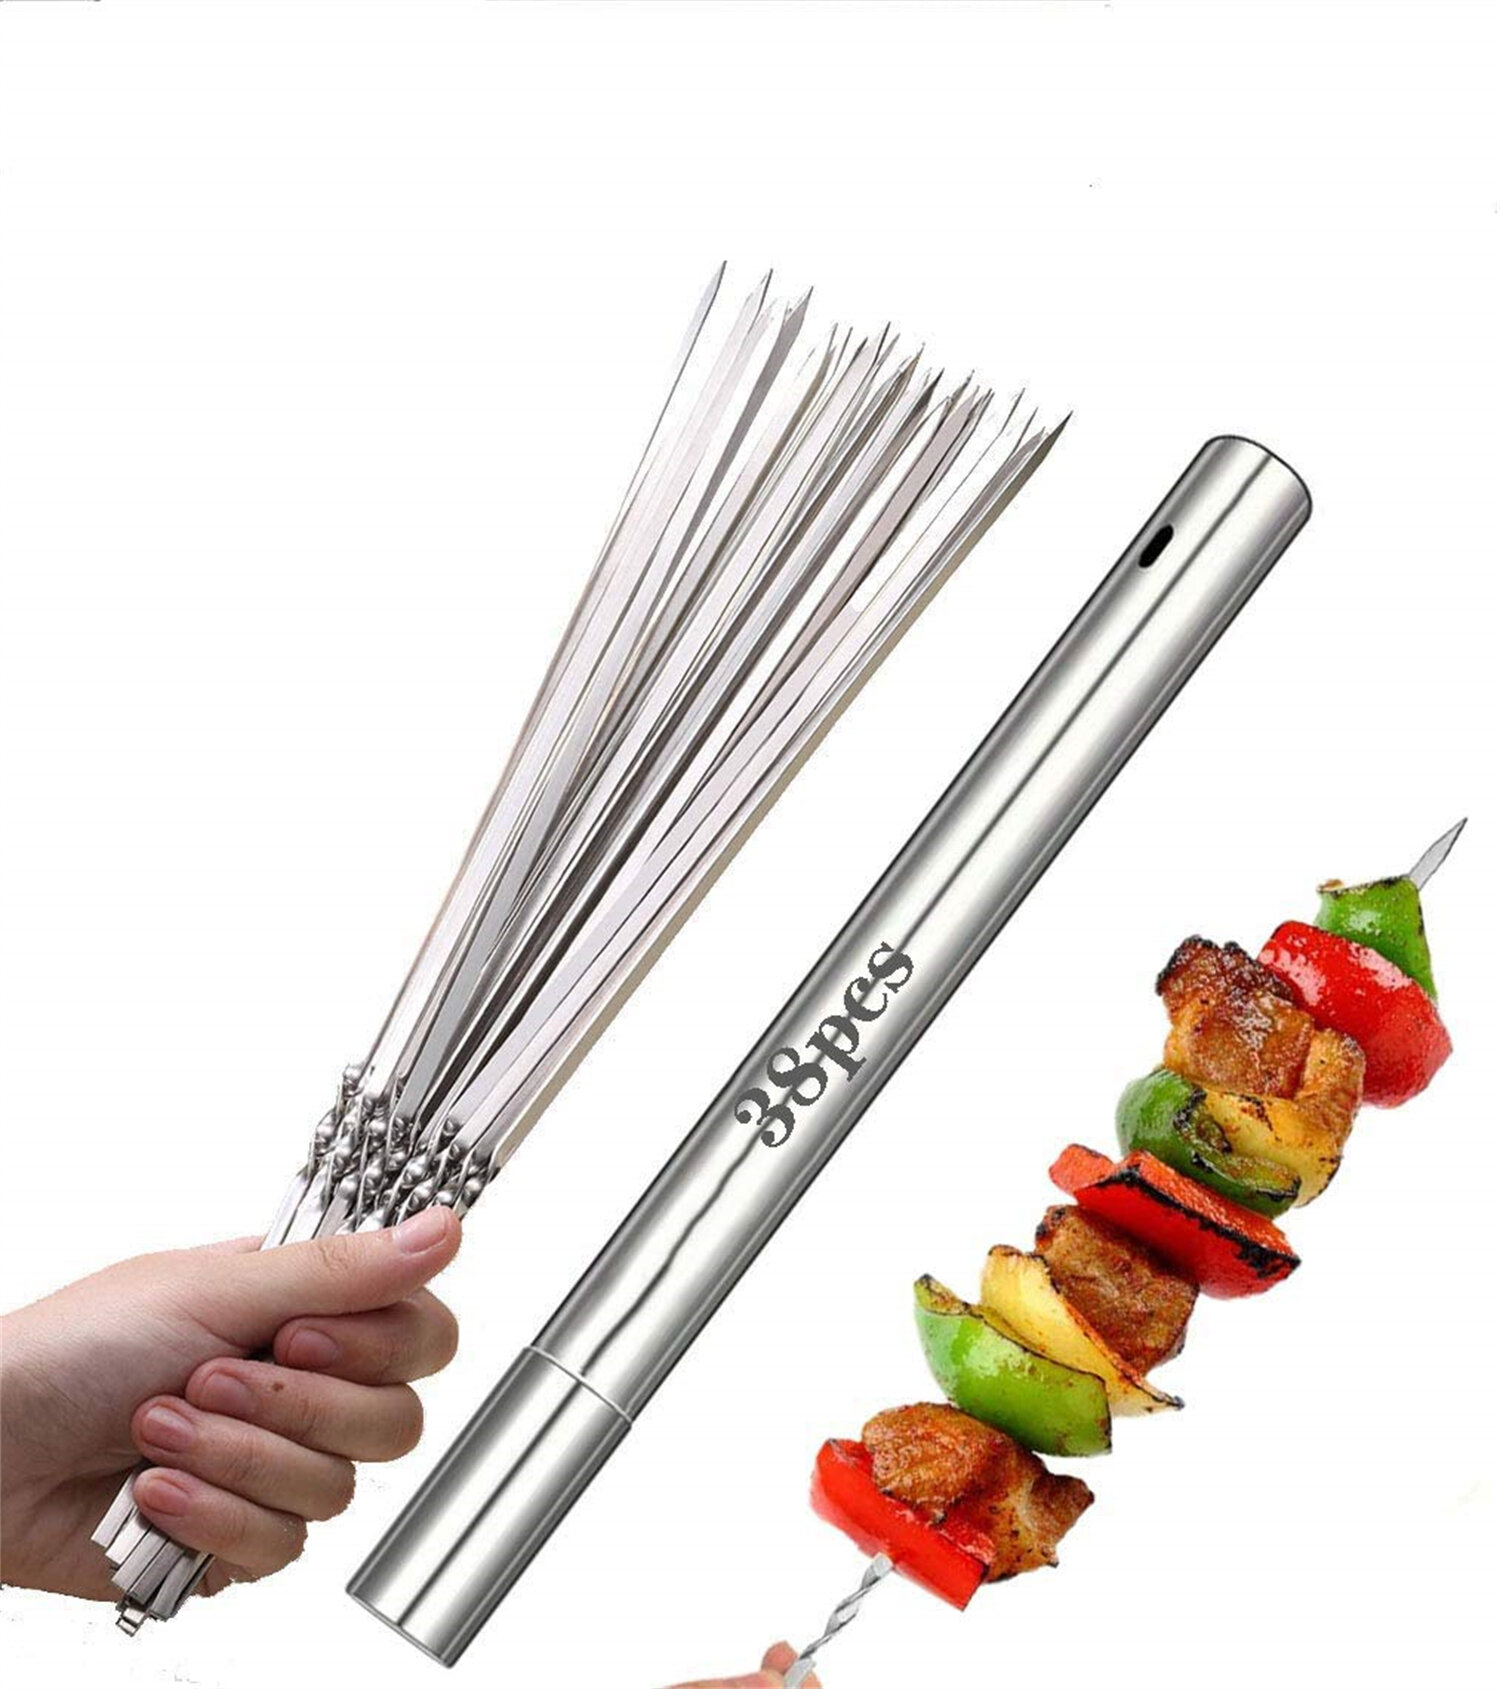 LONG PREMIUM BARBECUE SKEWERS  KEBAB GRILL MEAT COOKING BBQ STEEL STICKS NEW 